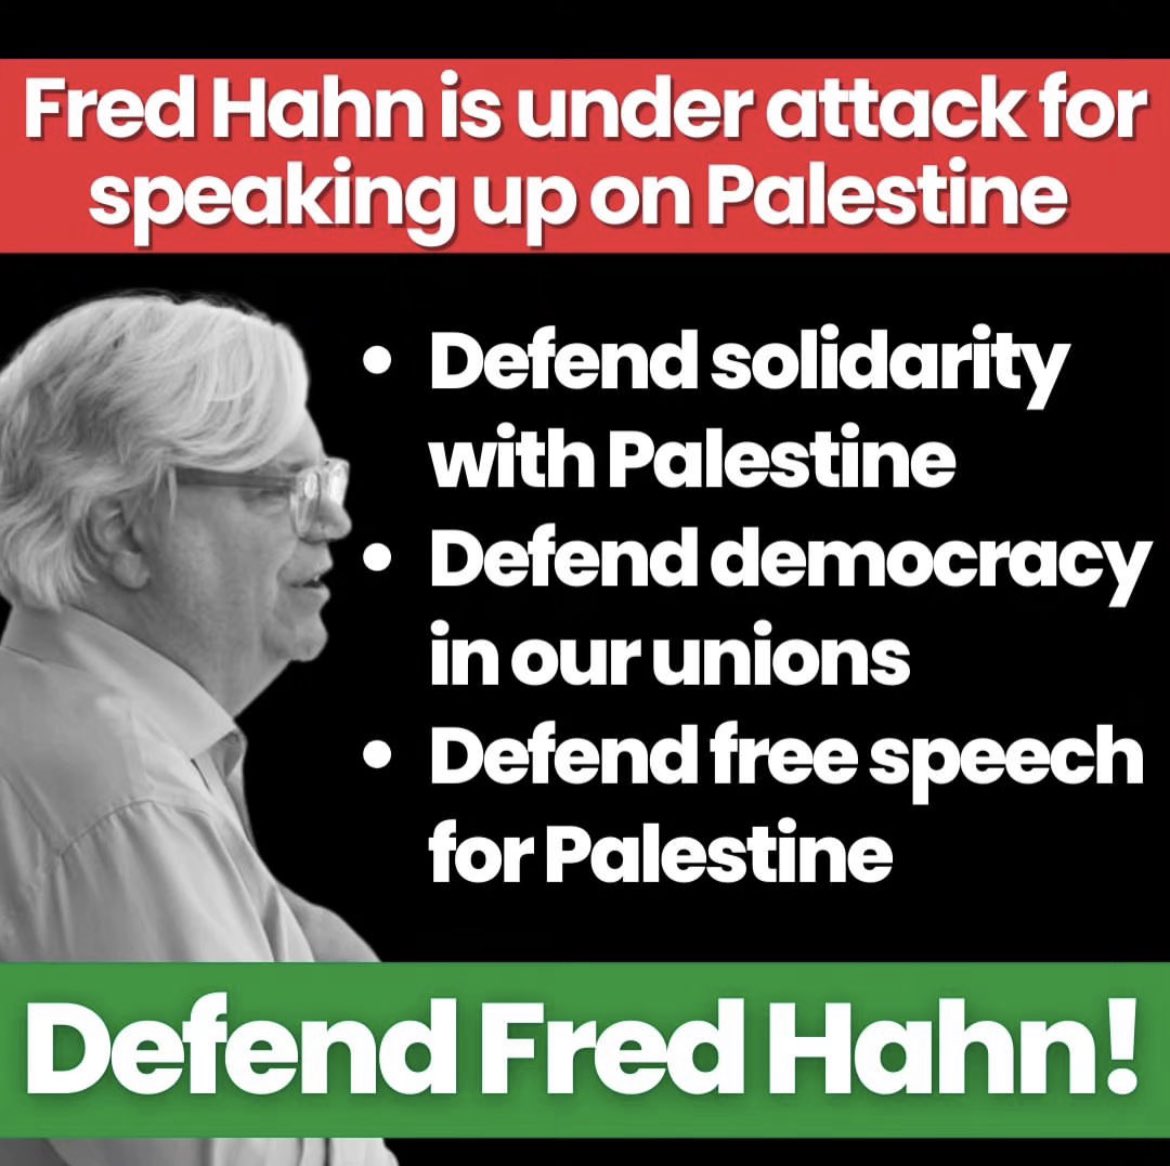 Defend @FredHahnCUPE!